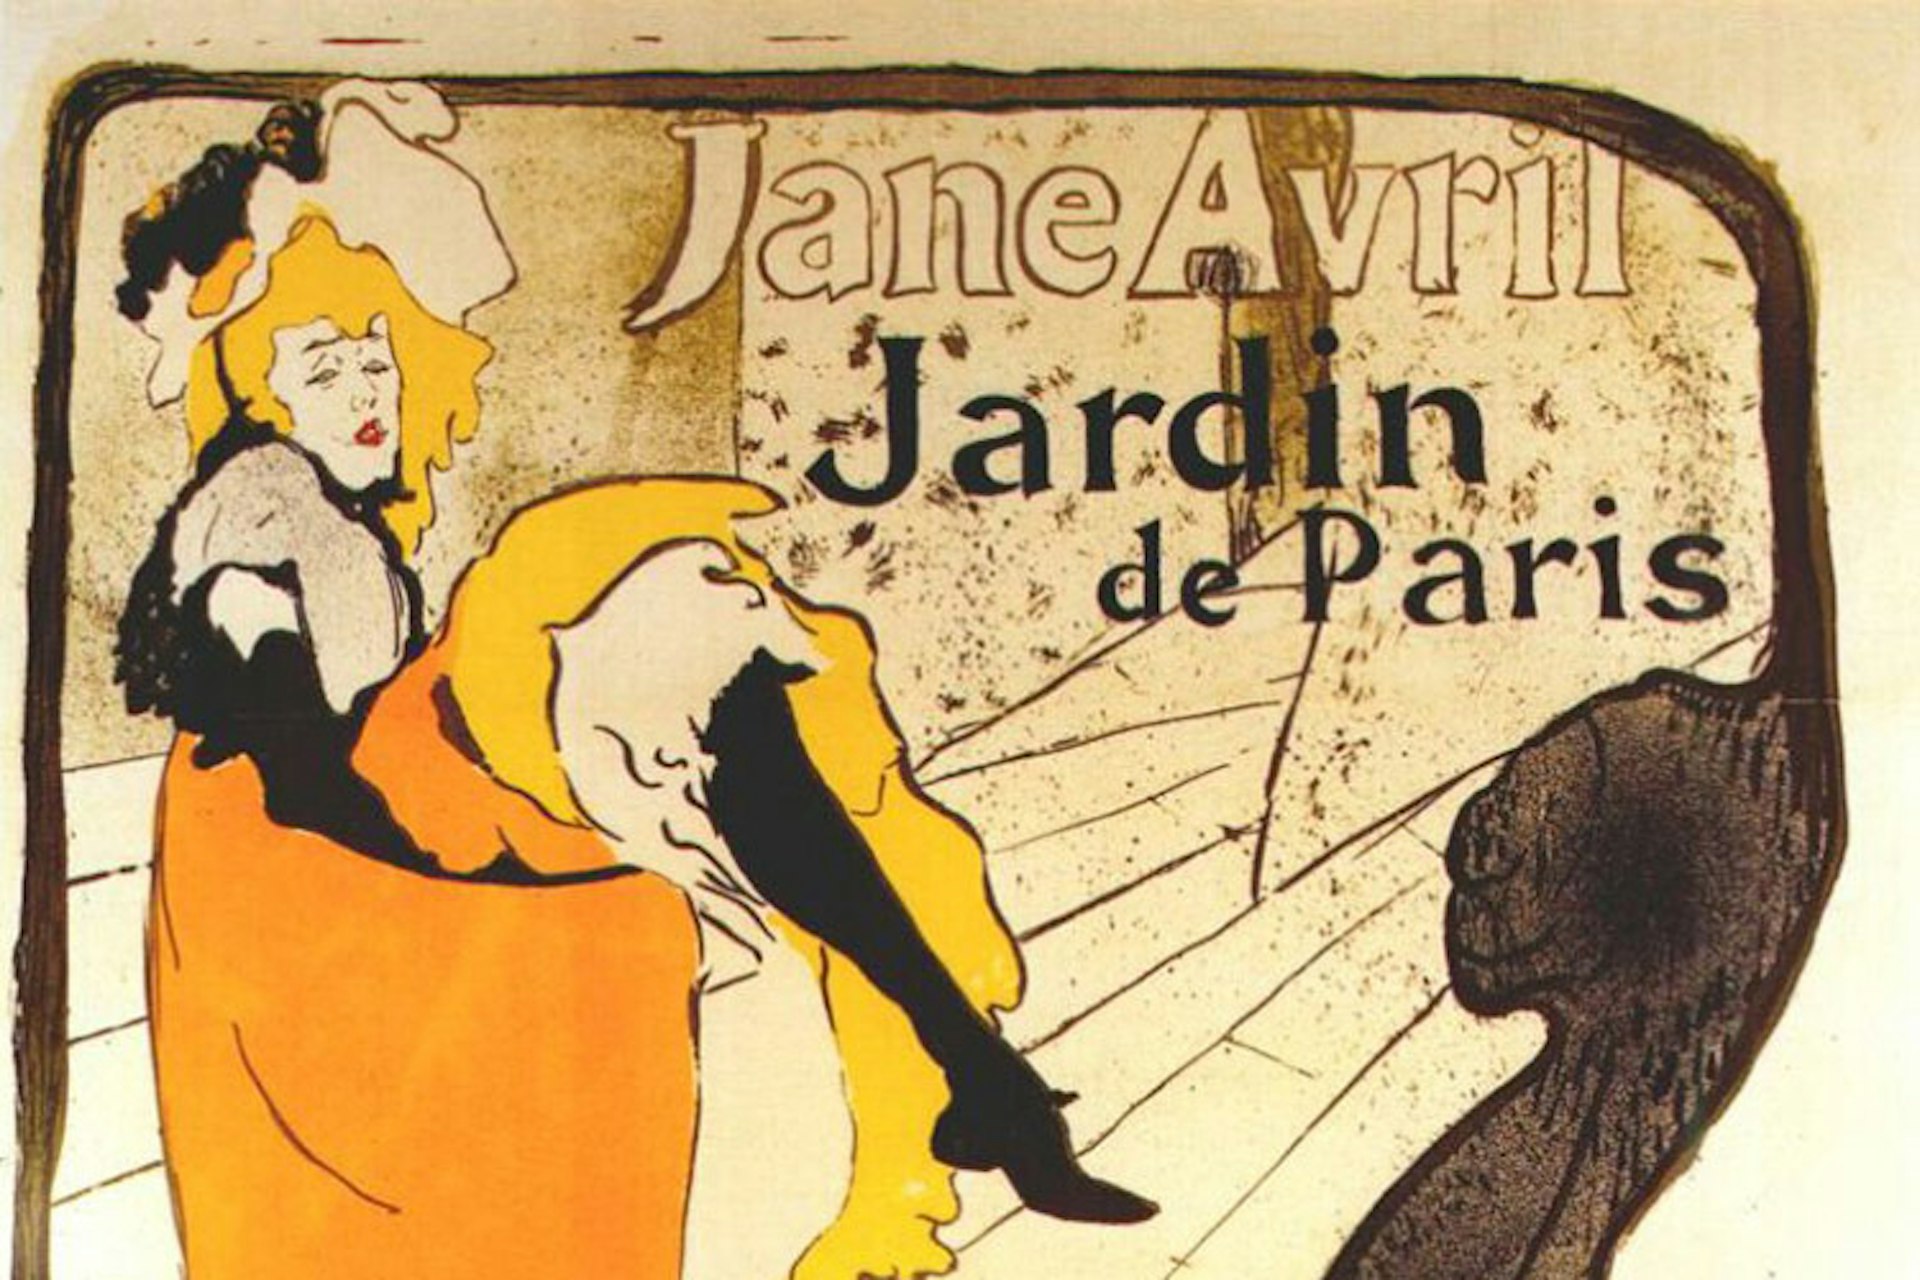 A detail from Toulouse-Lautrec's lithograph Jane Avril. Image from Wikimedia Commons